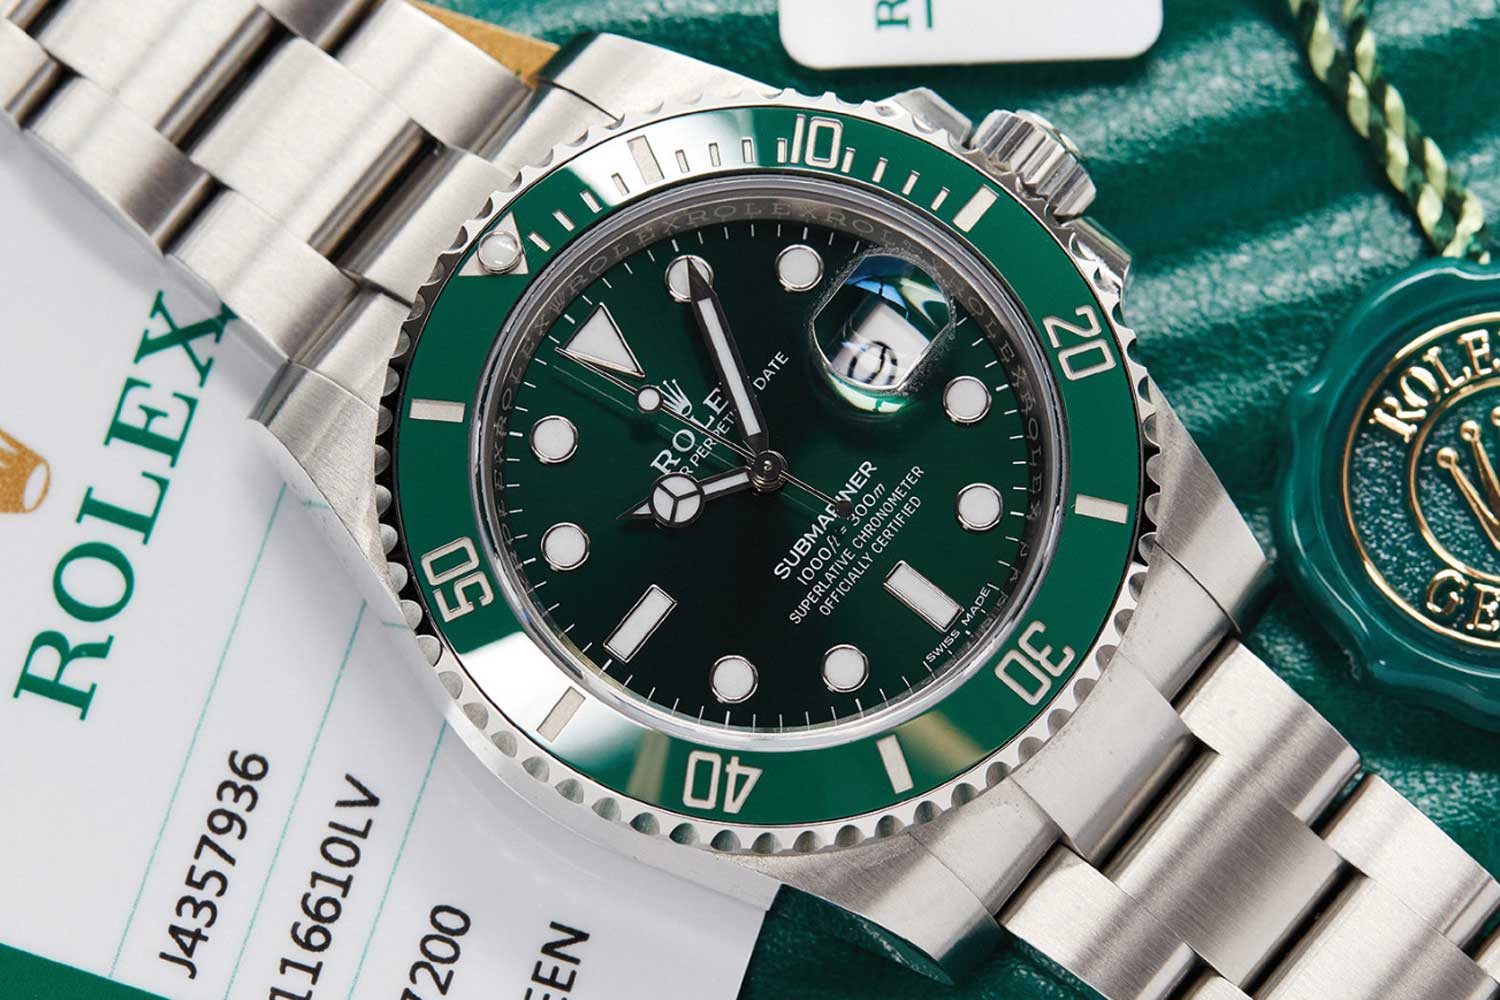 Rolex, Submariner, Ref. 116610LV sold at Phillips in NY in December 2021 (Image: Phillips)